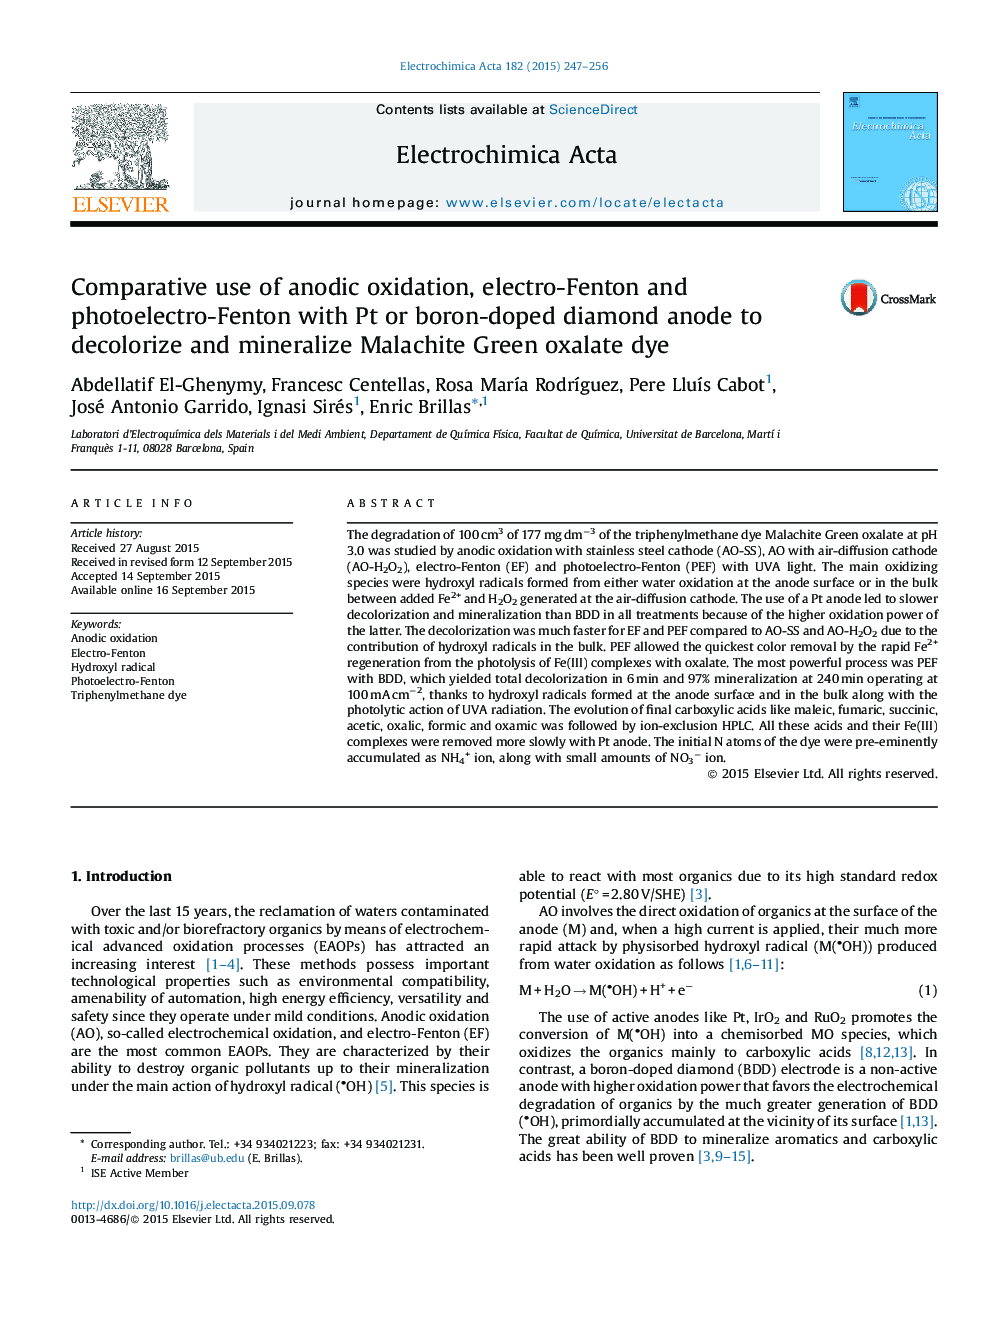 Comparative use of anodic oxidation, electro-Fenton and photoelectro-Fenton with Pt or boron-doped diamond anode to decolorize and mineralize Malachite Green oxalate dye